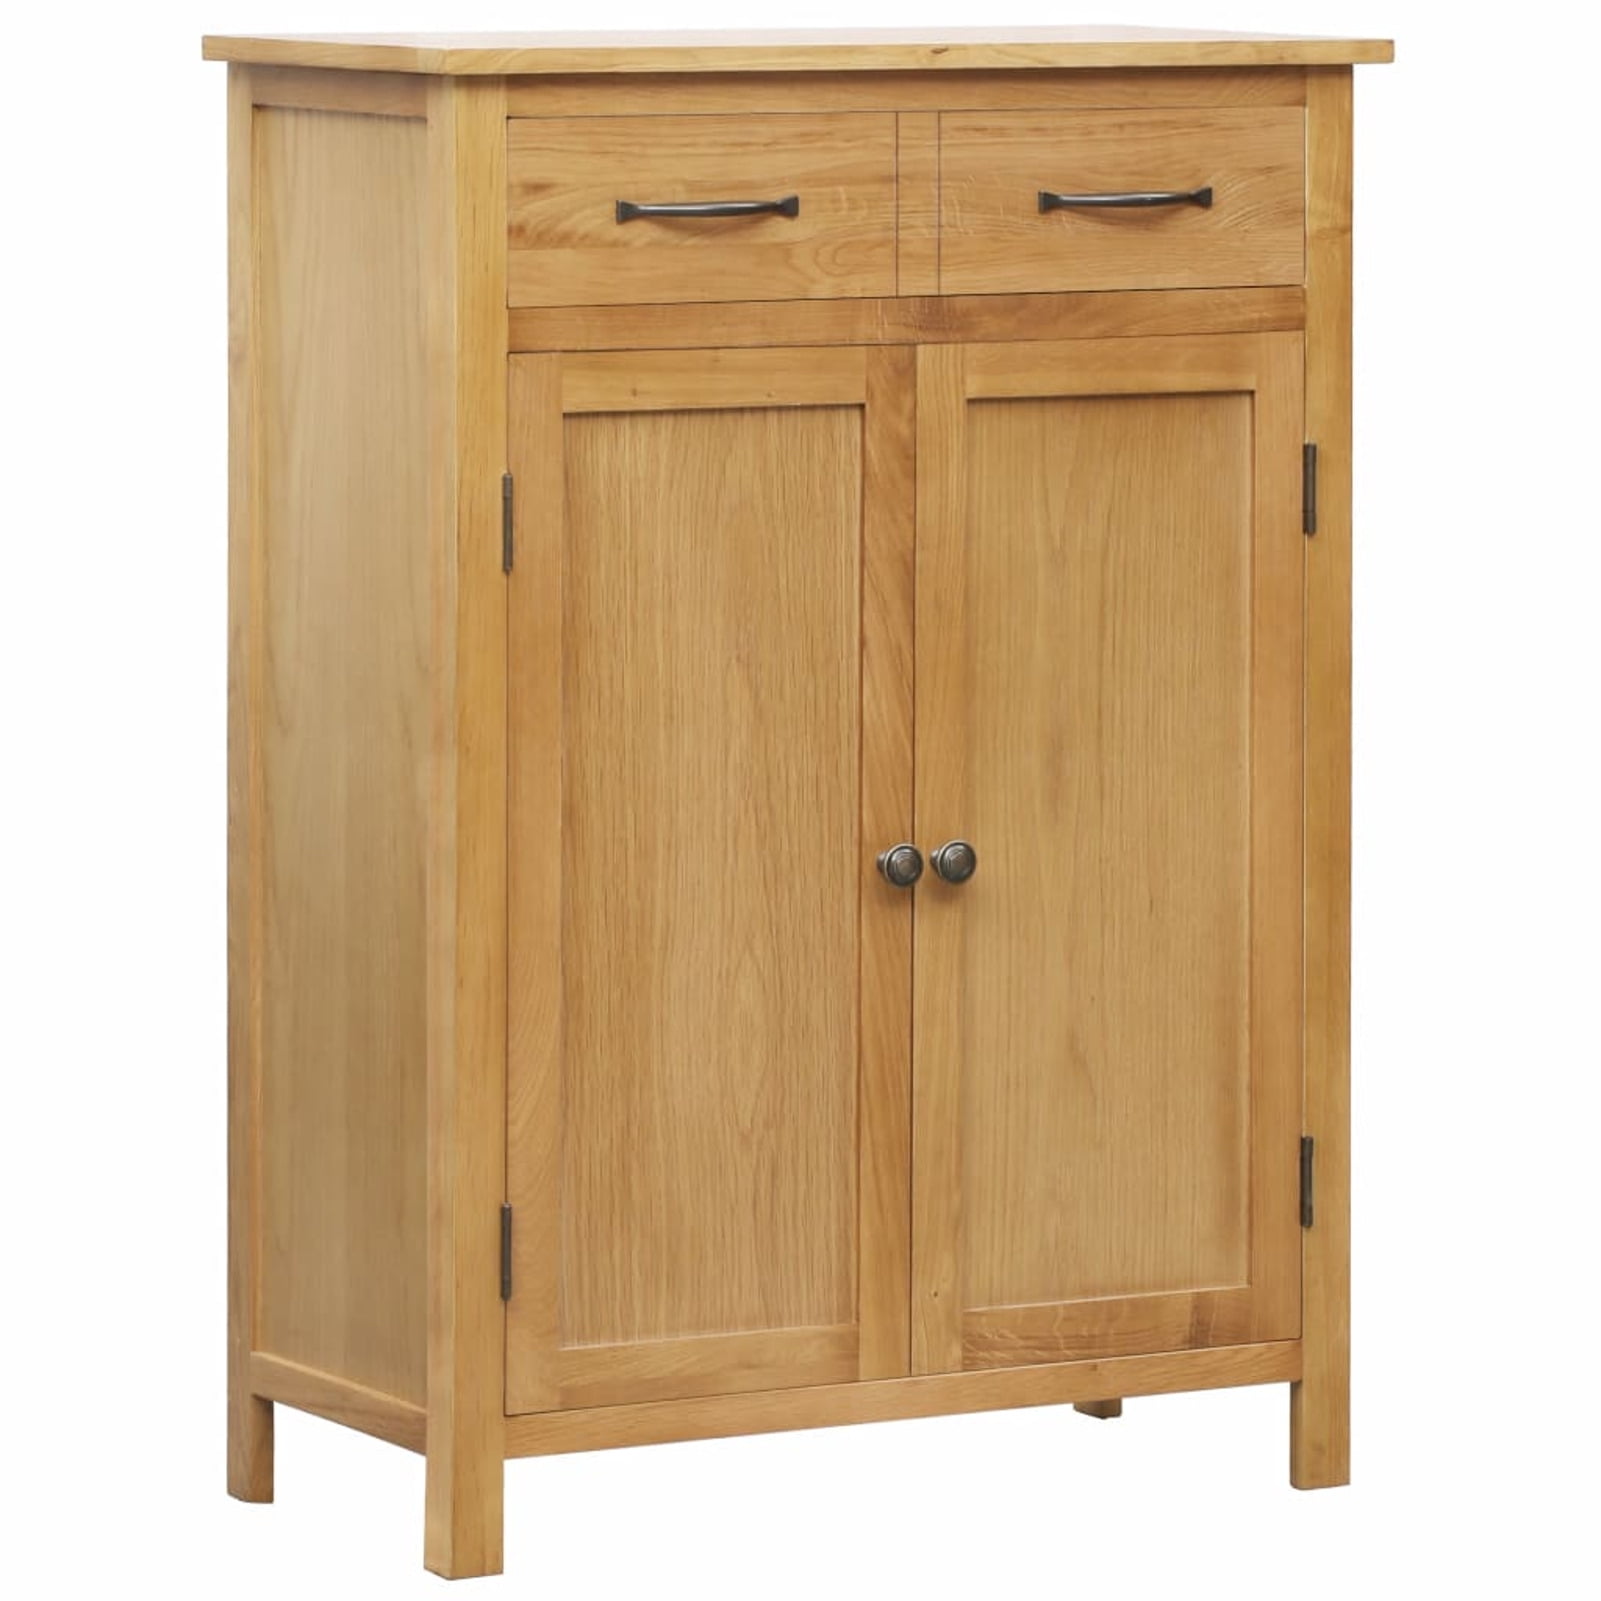 Dcenta Shoe Cabinet 29.9"x14.6"x41.3" Solid -